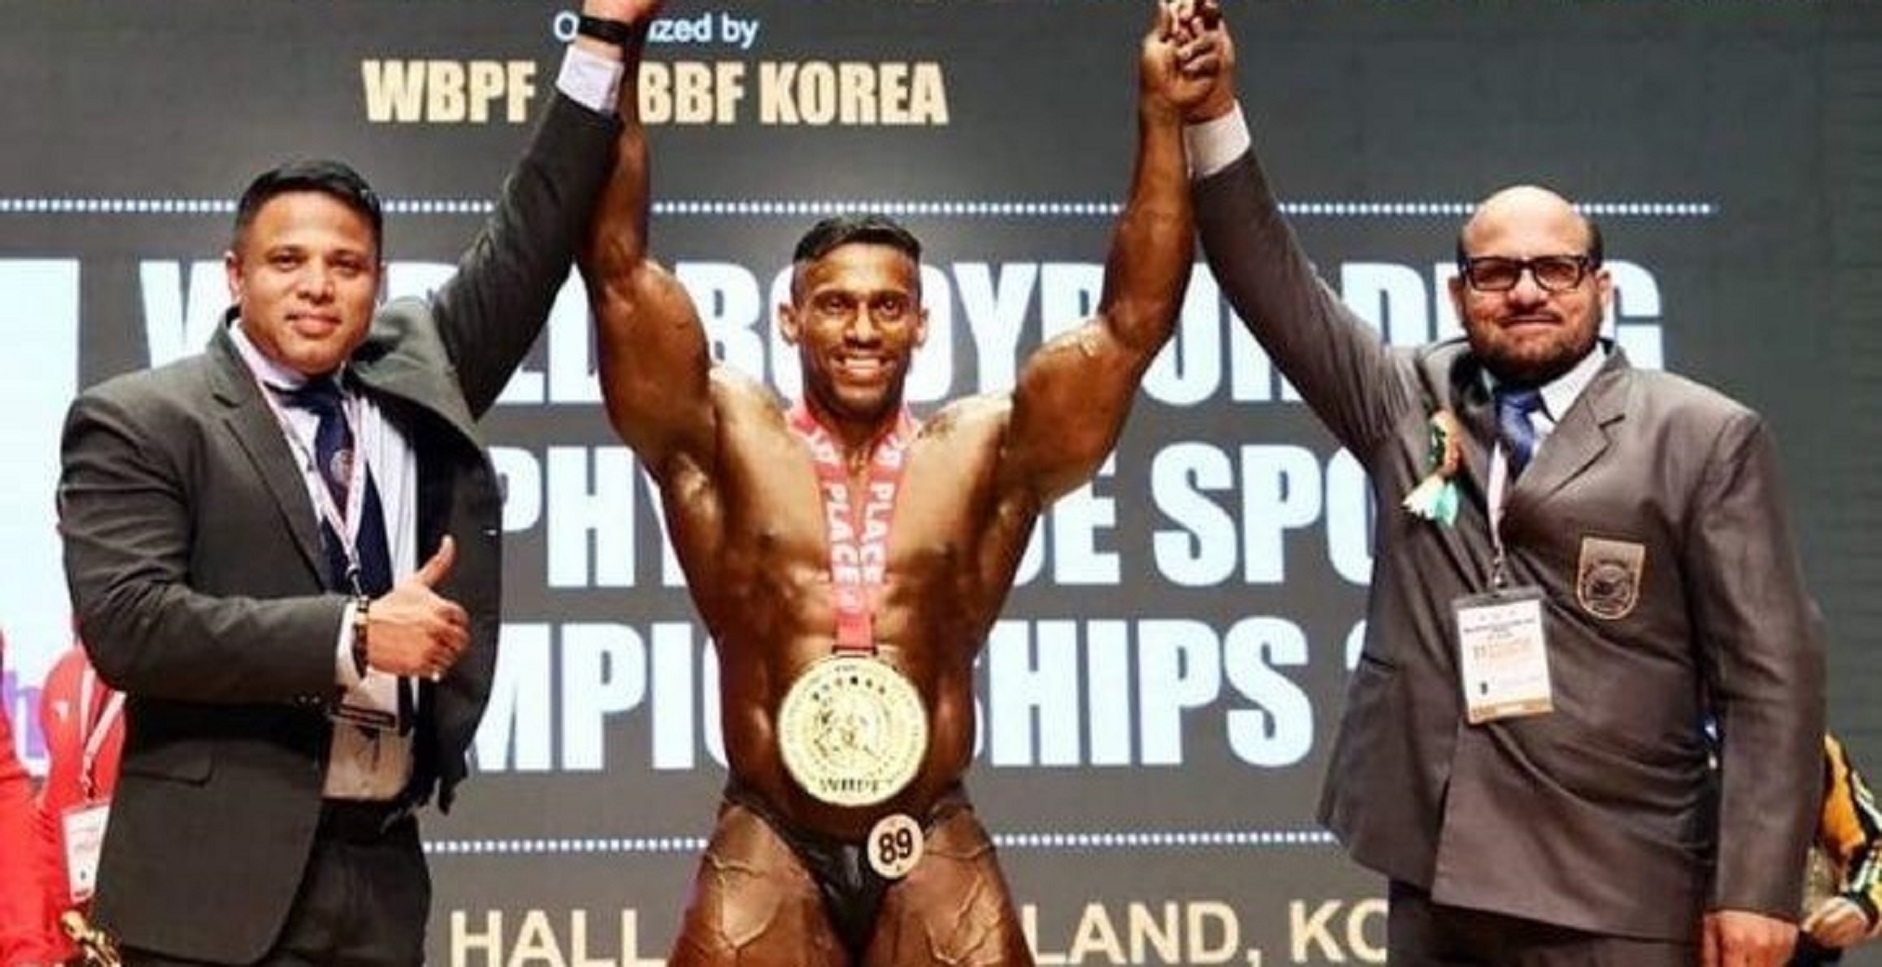 International Bodybuilding: Kerala Man Becomes First Indian To Win Mr Universe Title